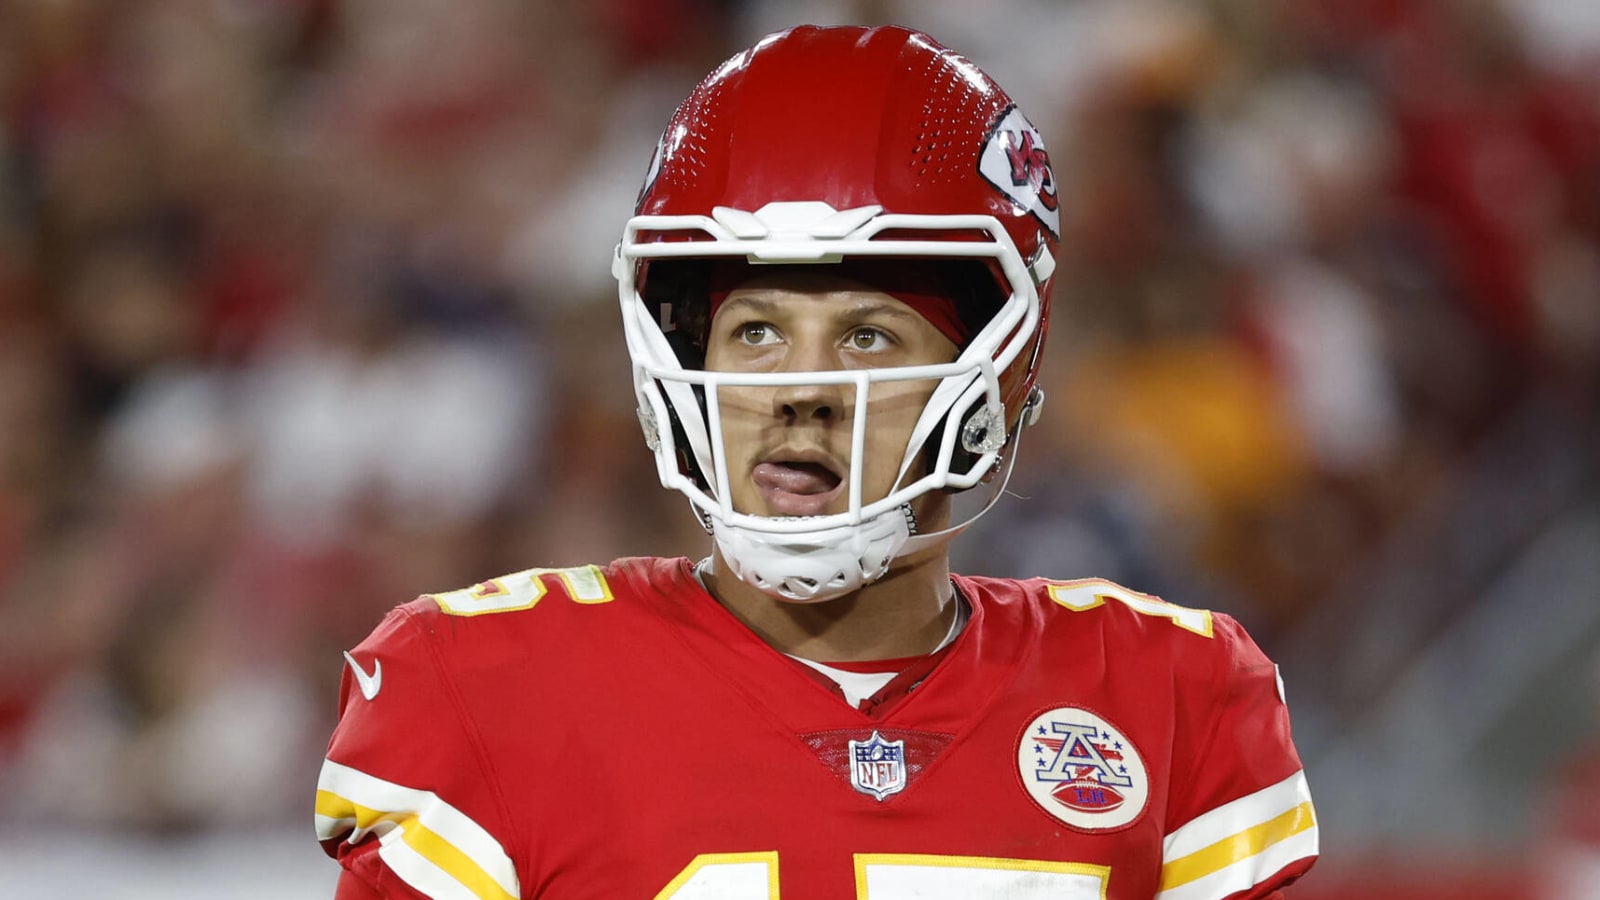 Patrick Mahomes practiced basketball before teardrop TD pass